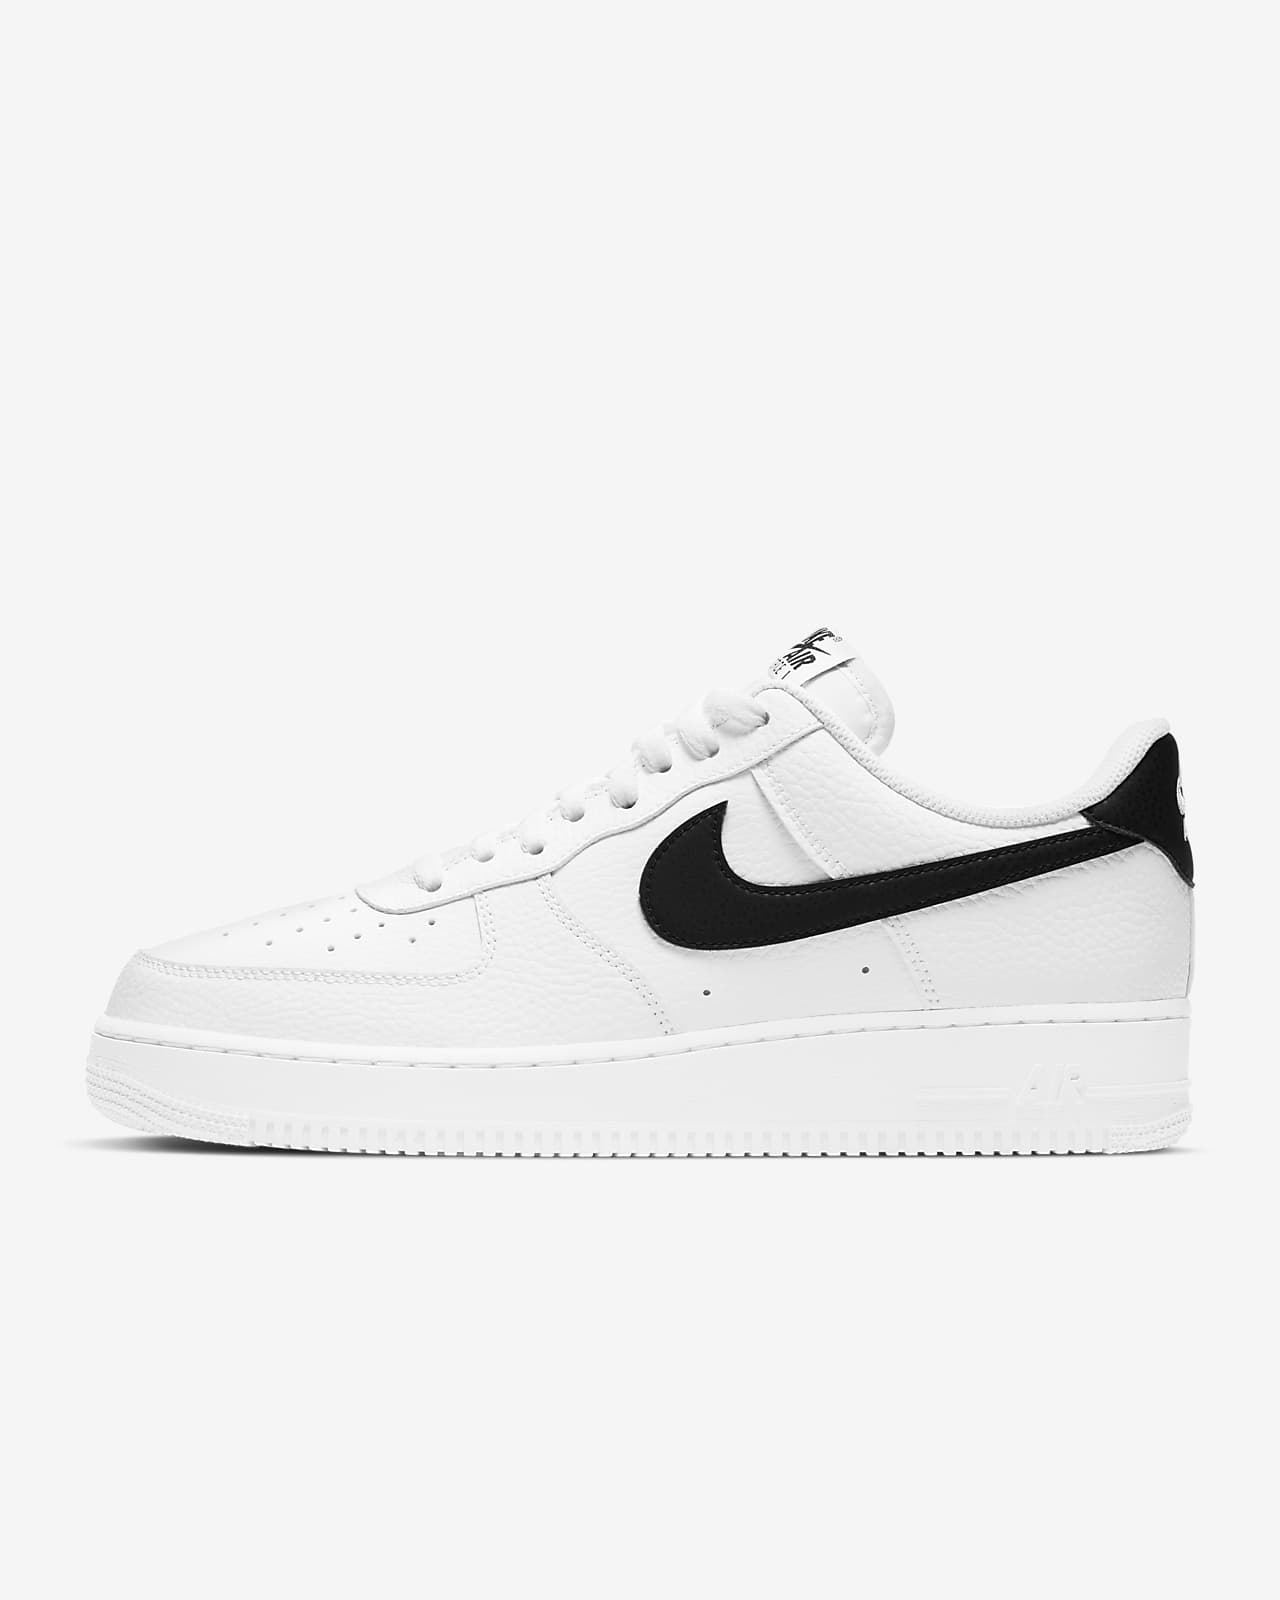 chaussure nike homme sport